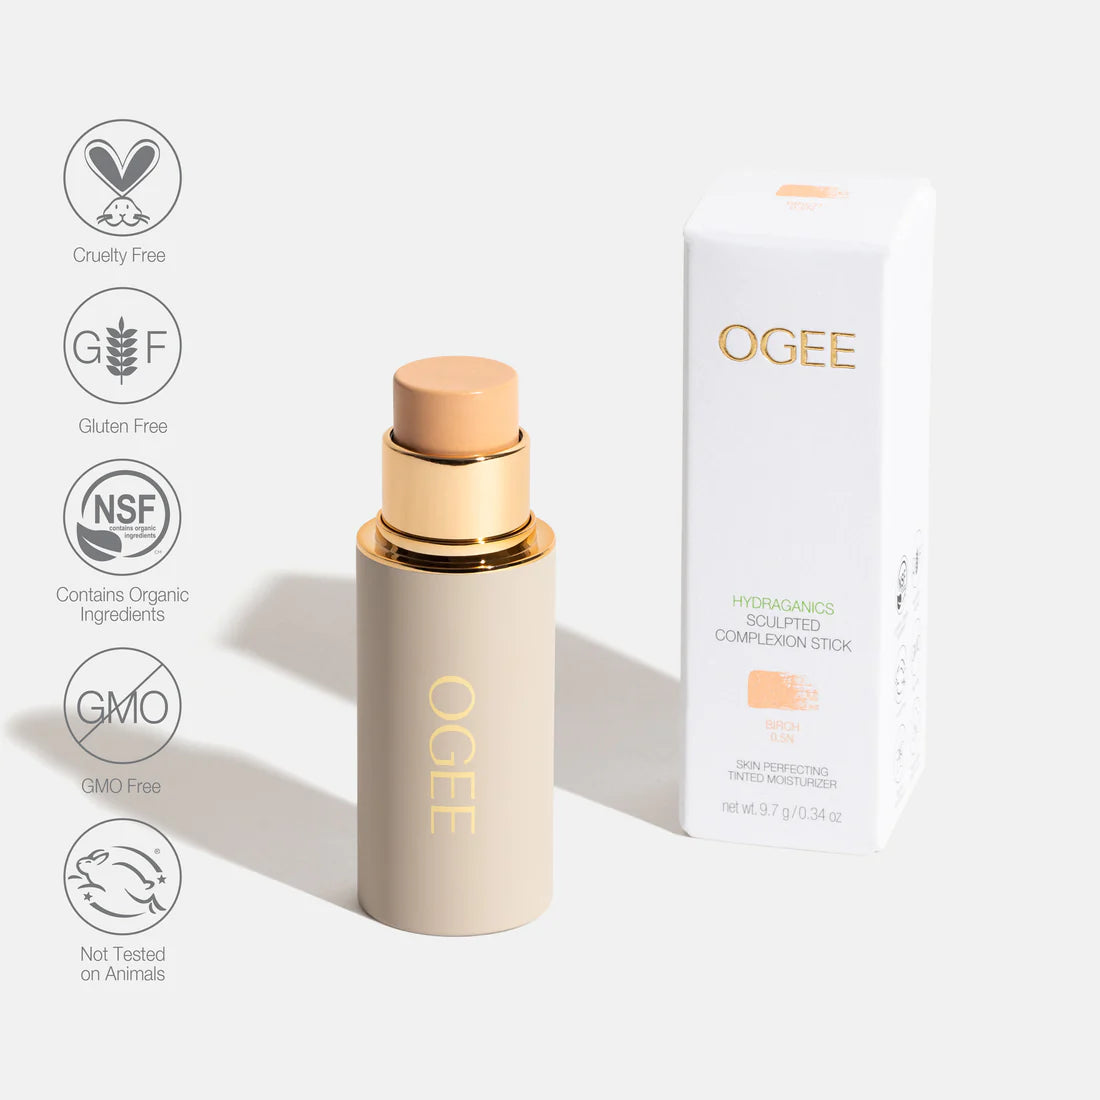 OGEE Sculpted Complexion Stick